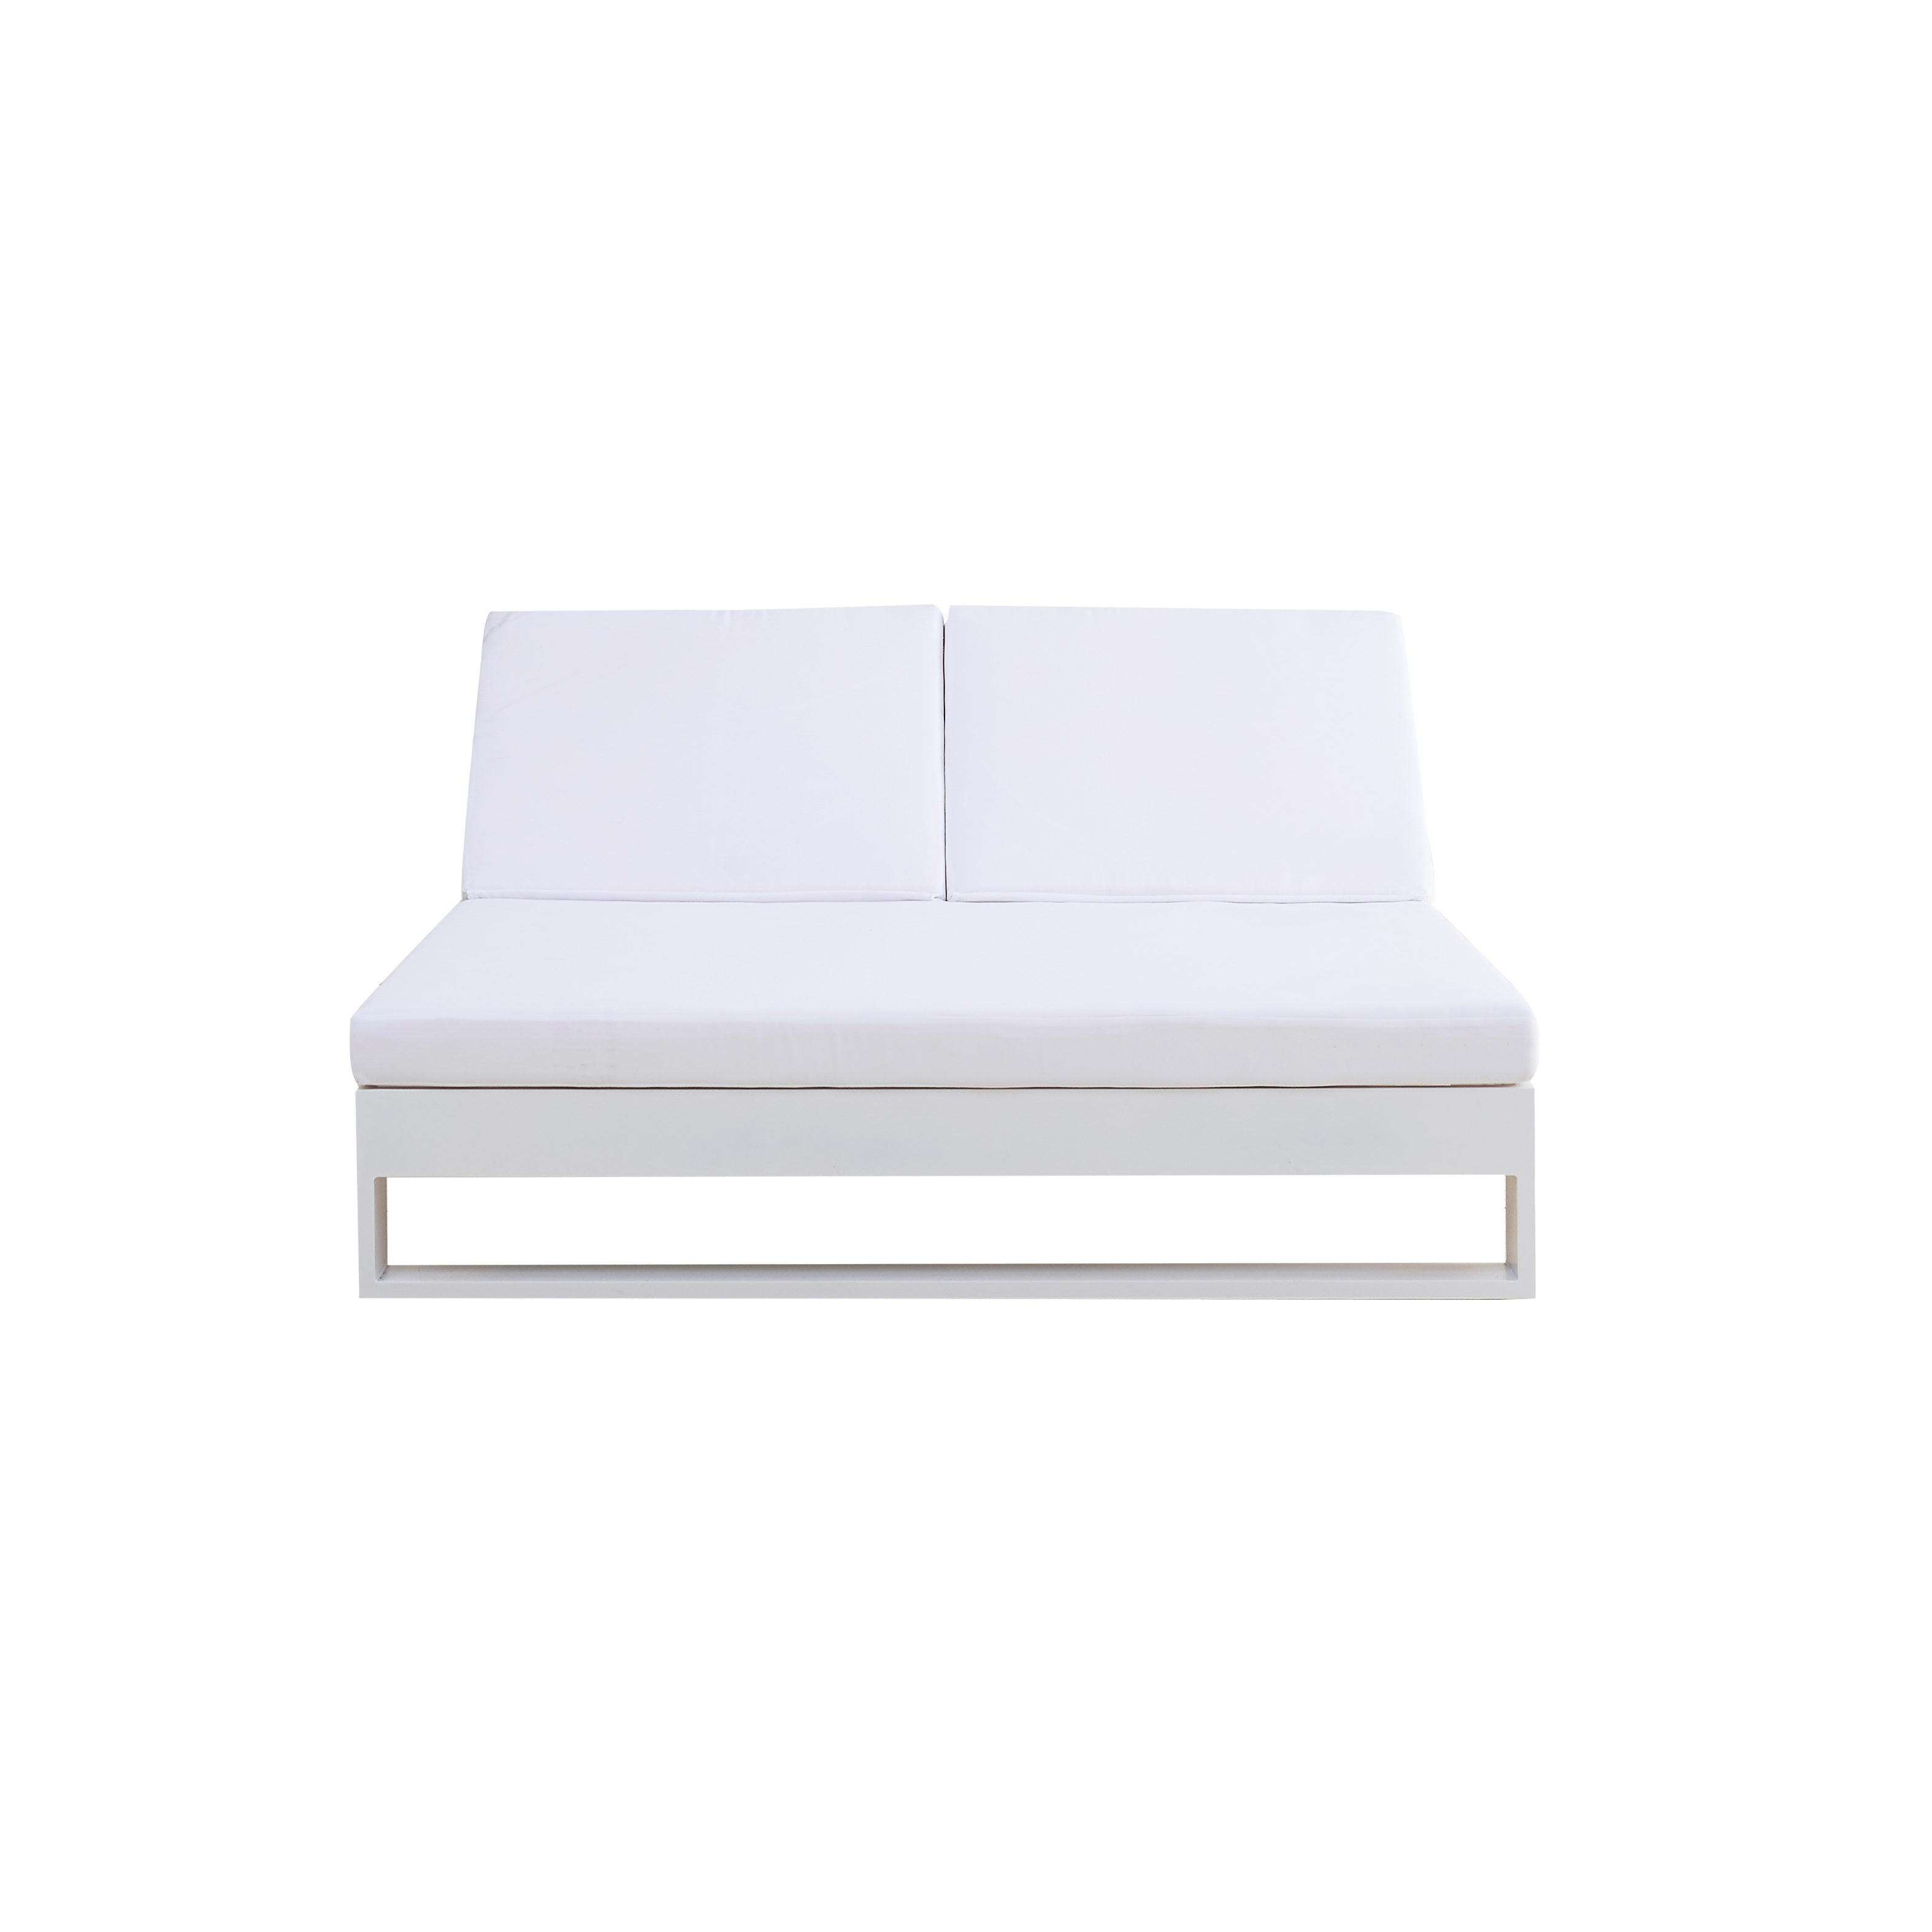 Golf duebel daybed S4